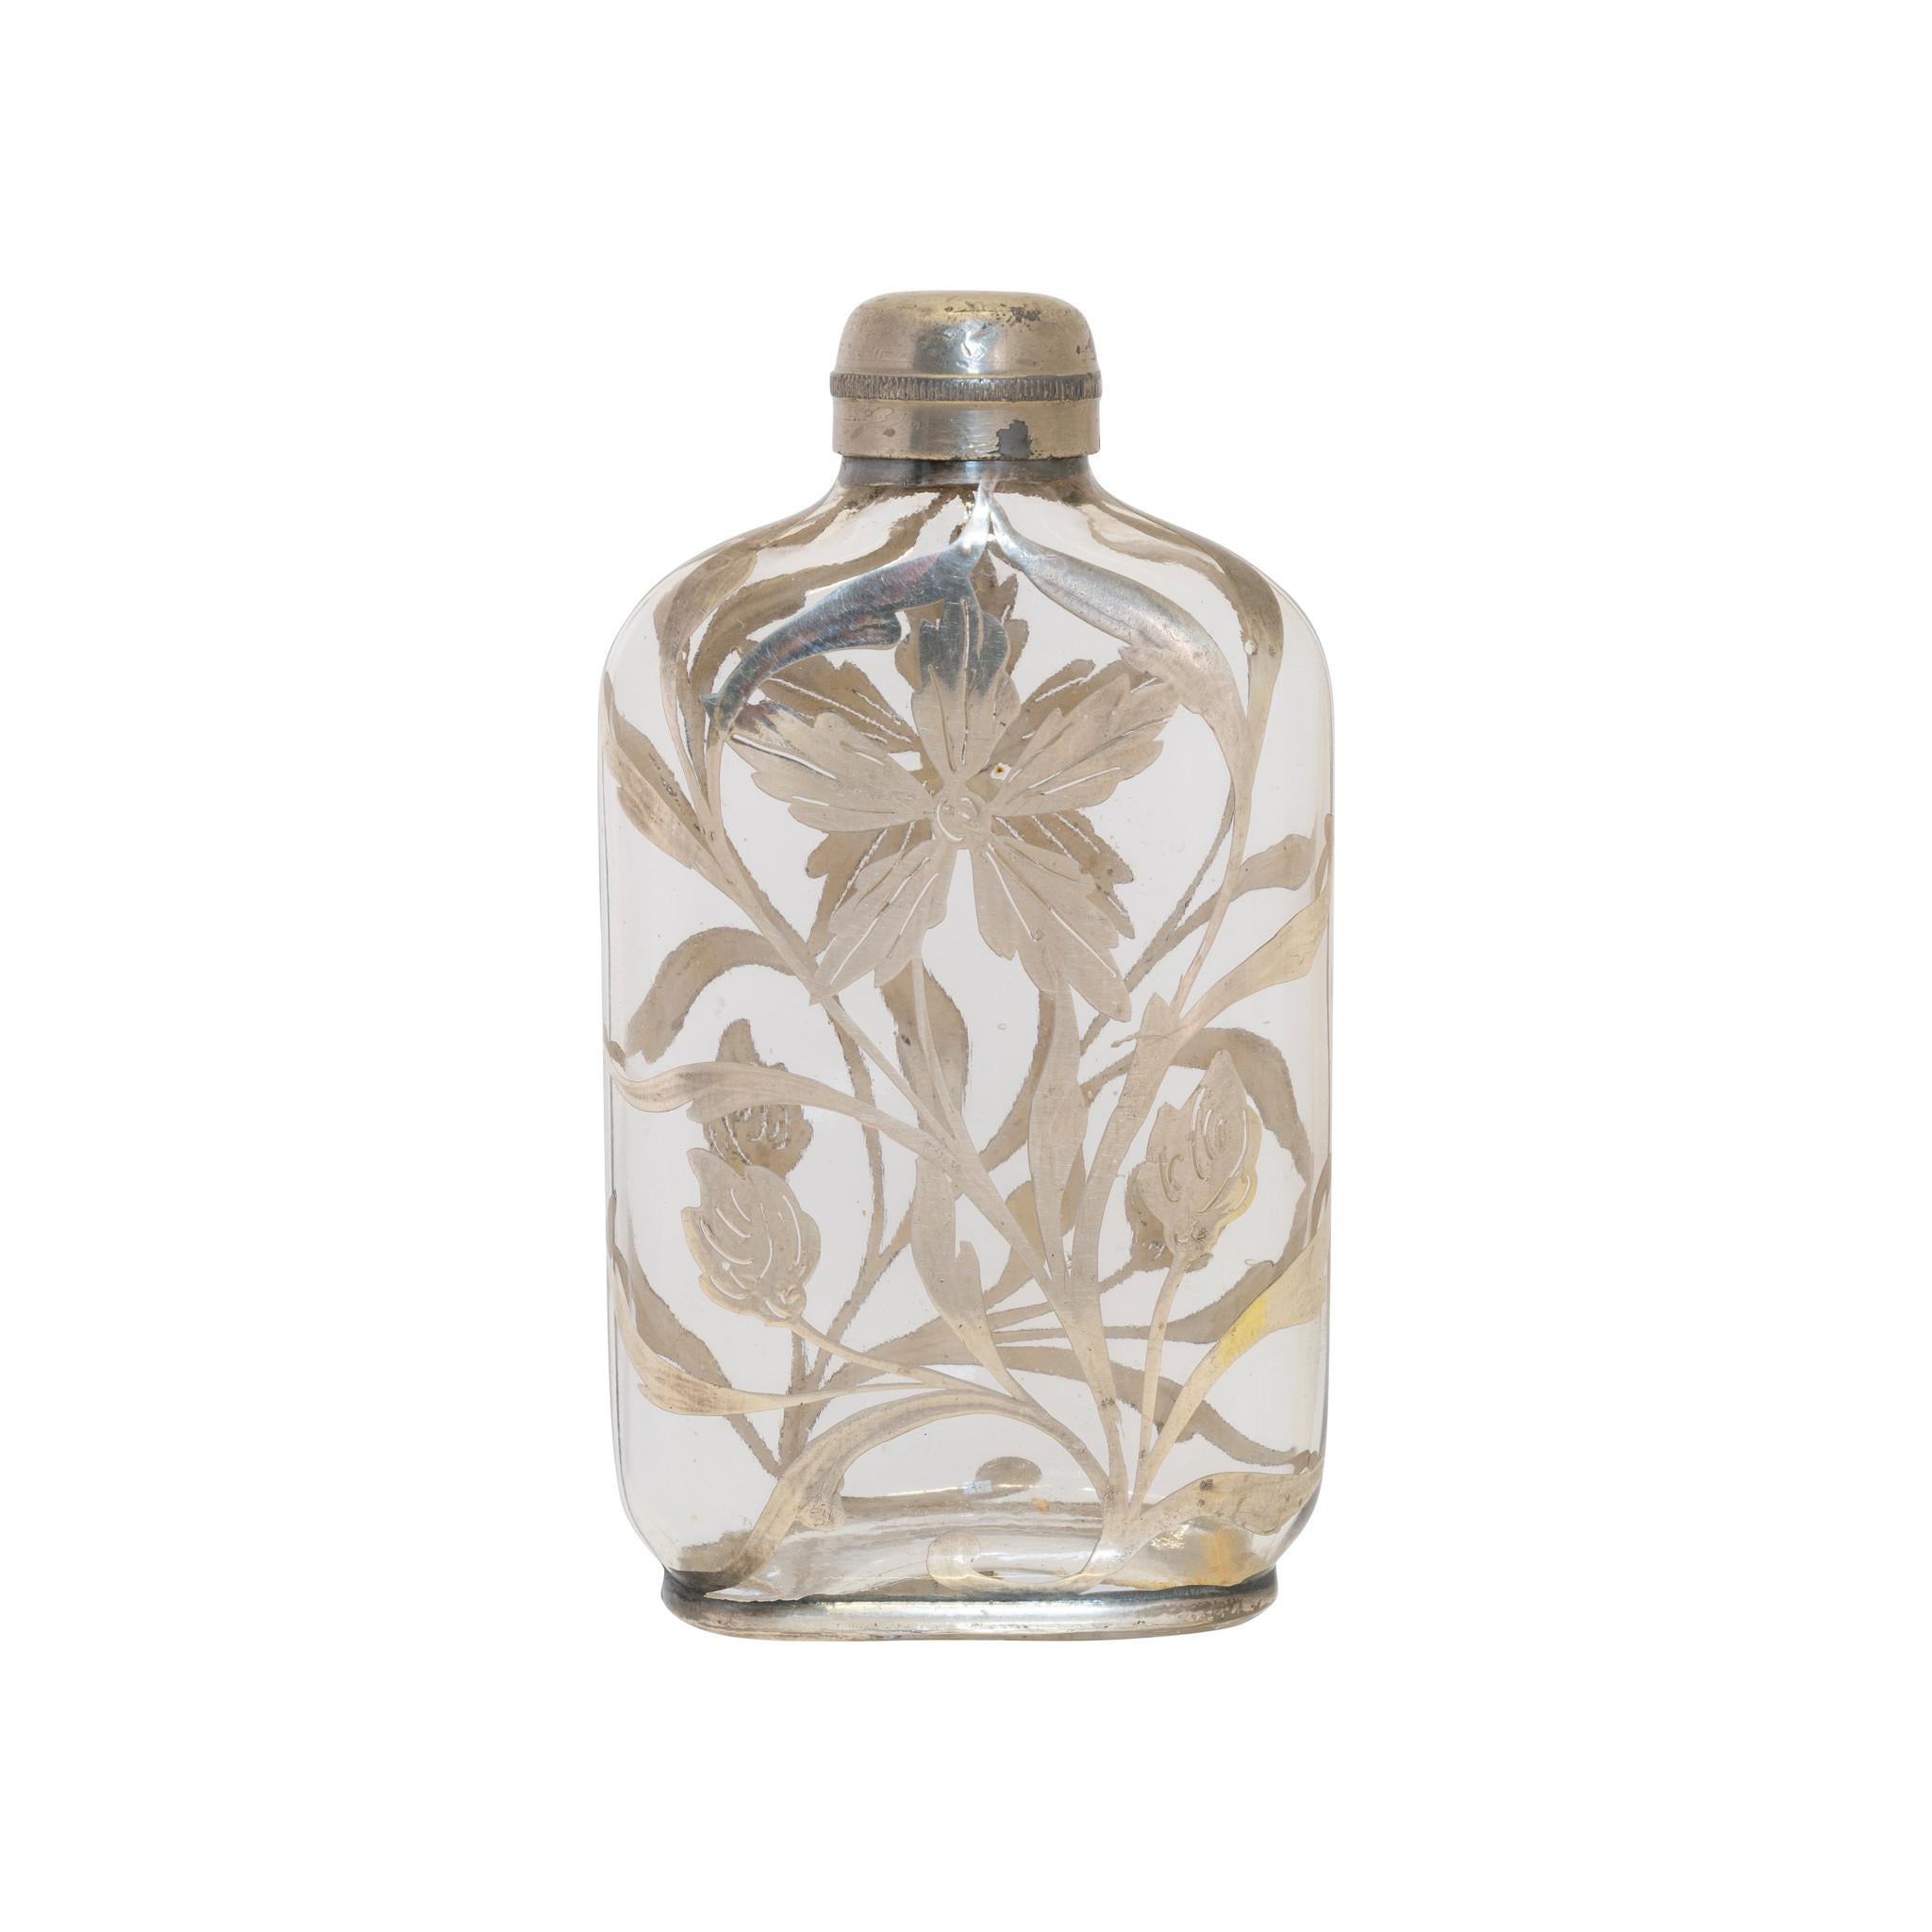 Victorian flask with overlaid sterling flower motif.

PERIOD: Last quarter 19th Century
ORIGIN: United States
SIZE: 4 1/2